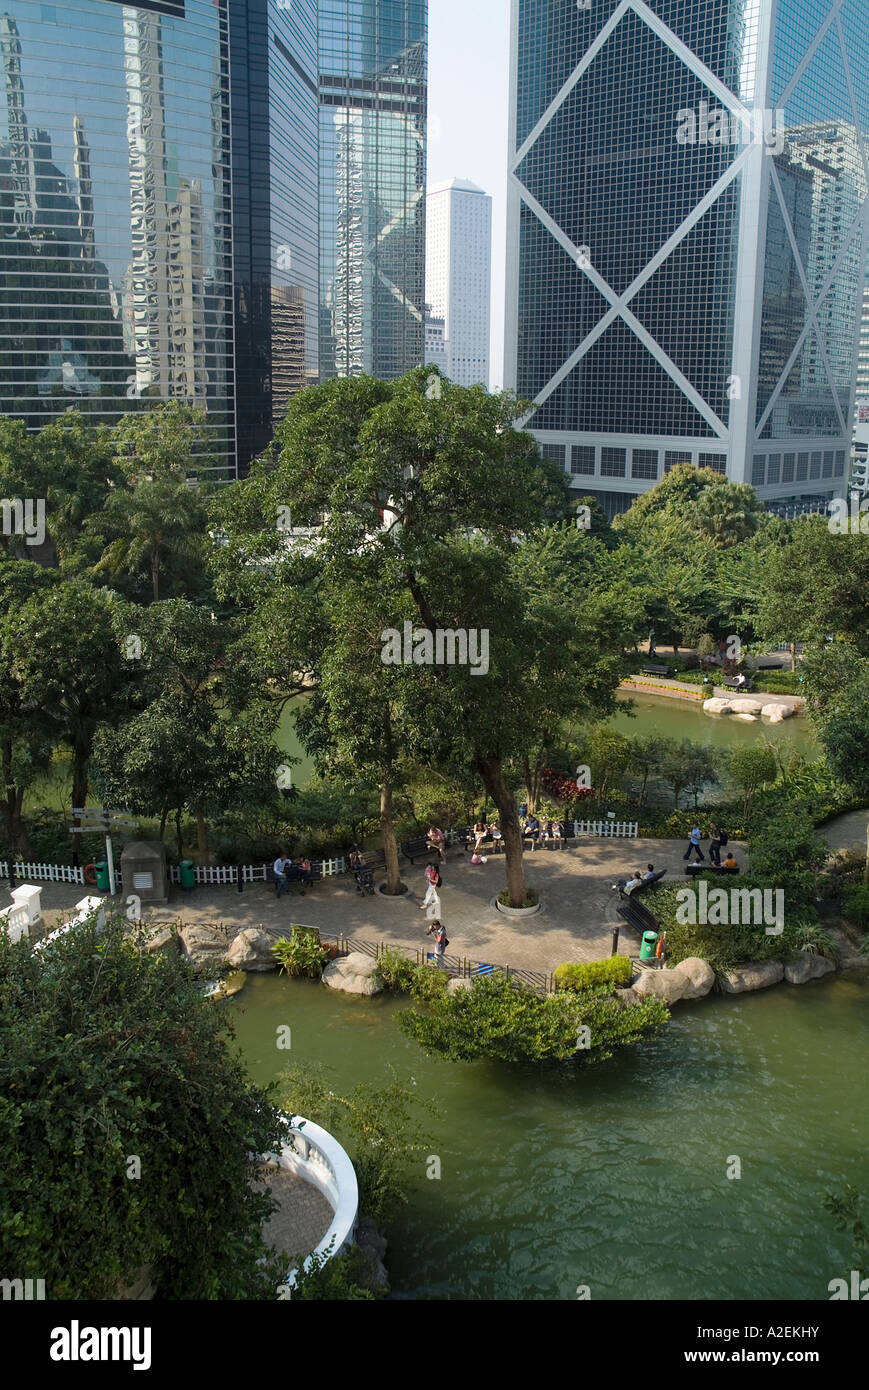 dh City parkland gardens CENTRAL PARK HONG KONG ASIA Lotus pool tree people relaxing multi storey buildings garden Stock Photo